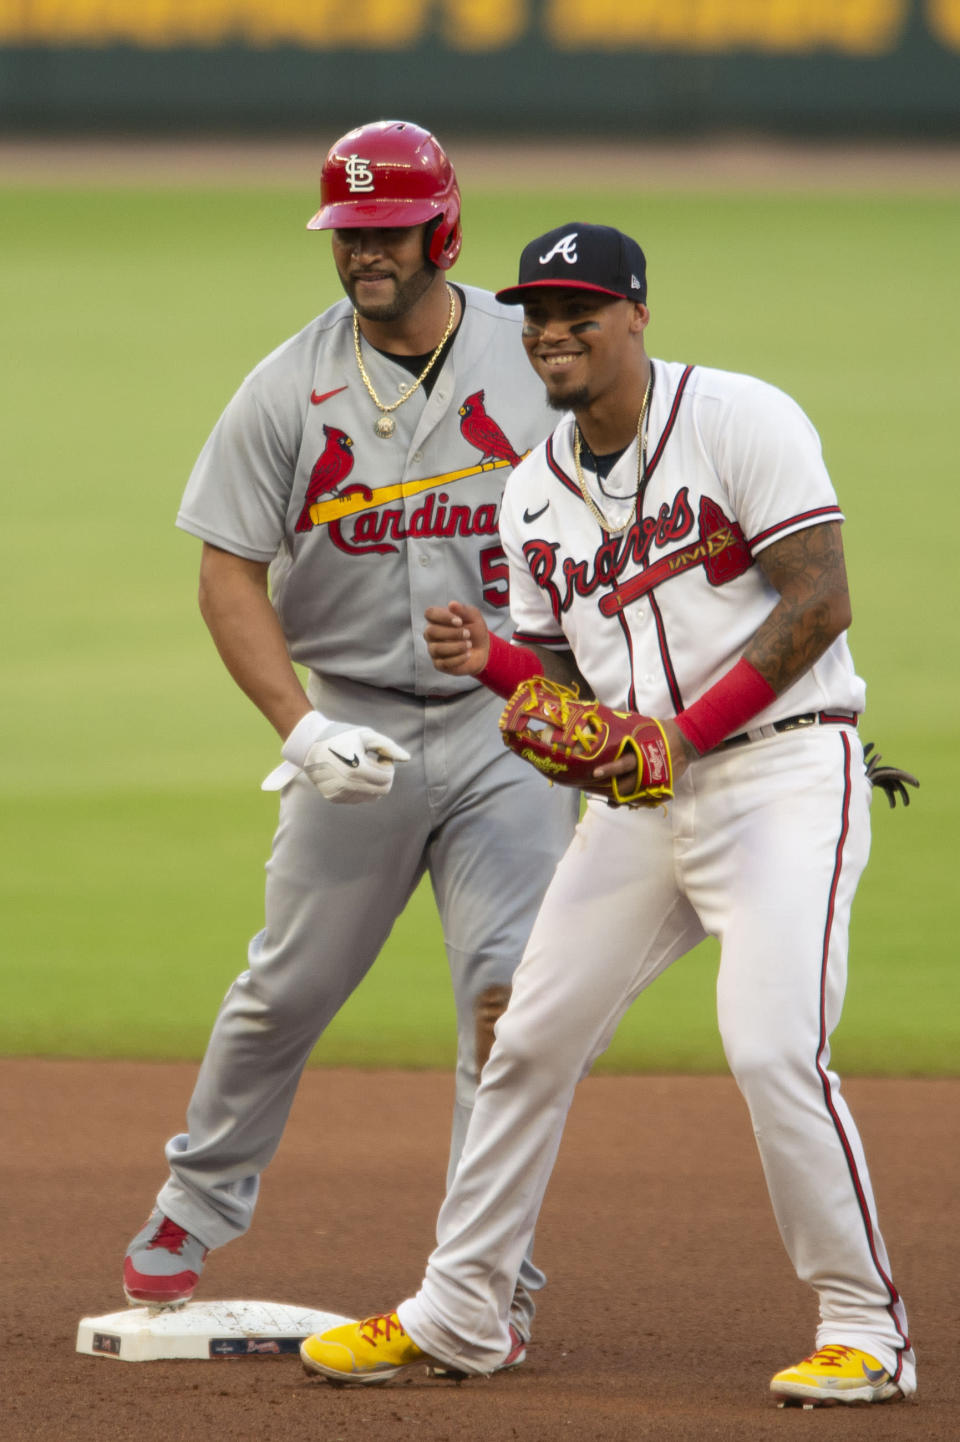 St. Louis Cardinals' Albert Pujols stands with Atlanta Braves second baseman Orlando Arcia after hitting a double during the third inning of a baseball game Wednesday, July 6, 2022, in Atlanta. (AP Photo/Edward M. Pio Roda)